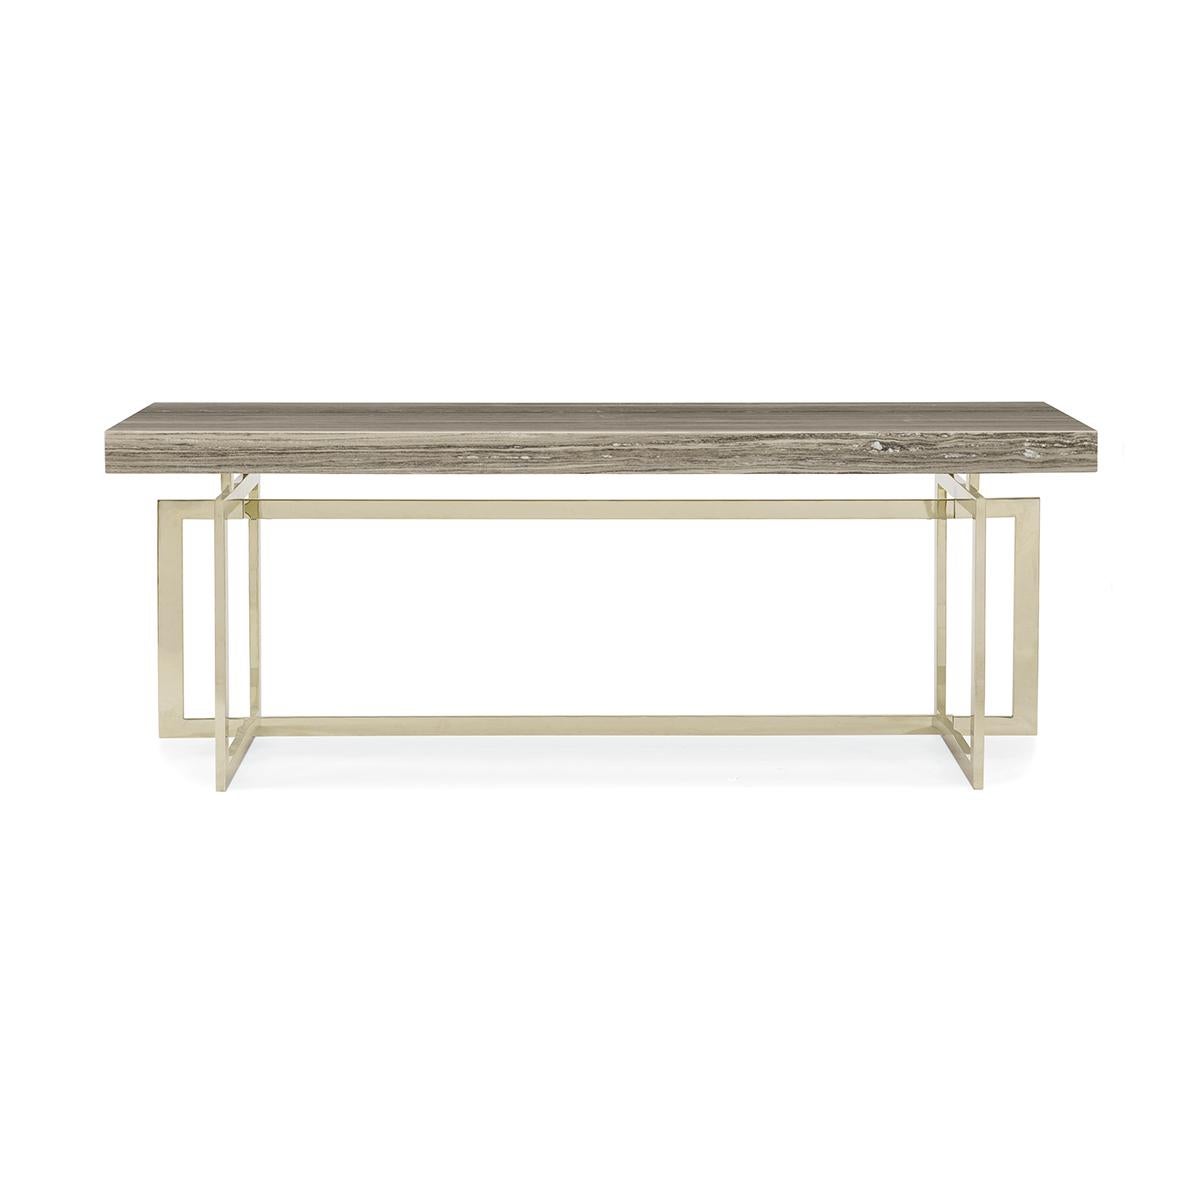 Modern sandstone console, bold and geometric in profile, this console has a flowing grey sandstone top with a deep mitered apron that sits atop two square, intertwined geometric frames in brilliant Whisper of Gold metal. It sits at a comfortable 28